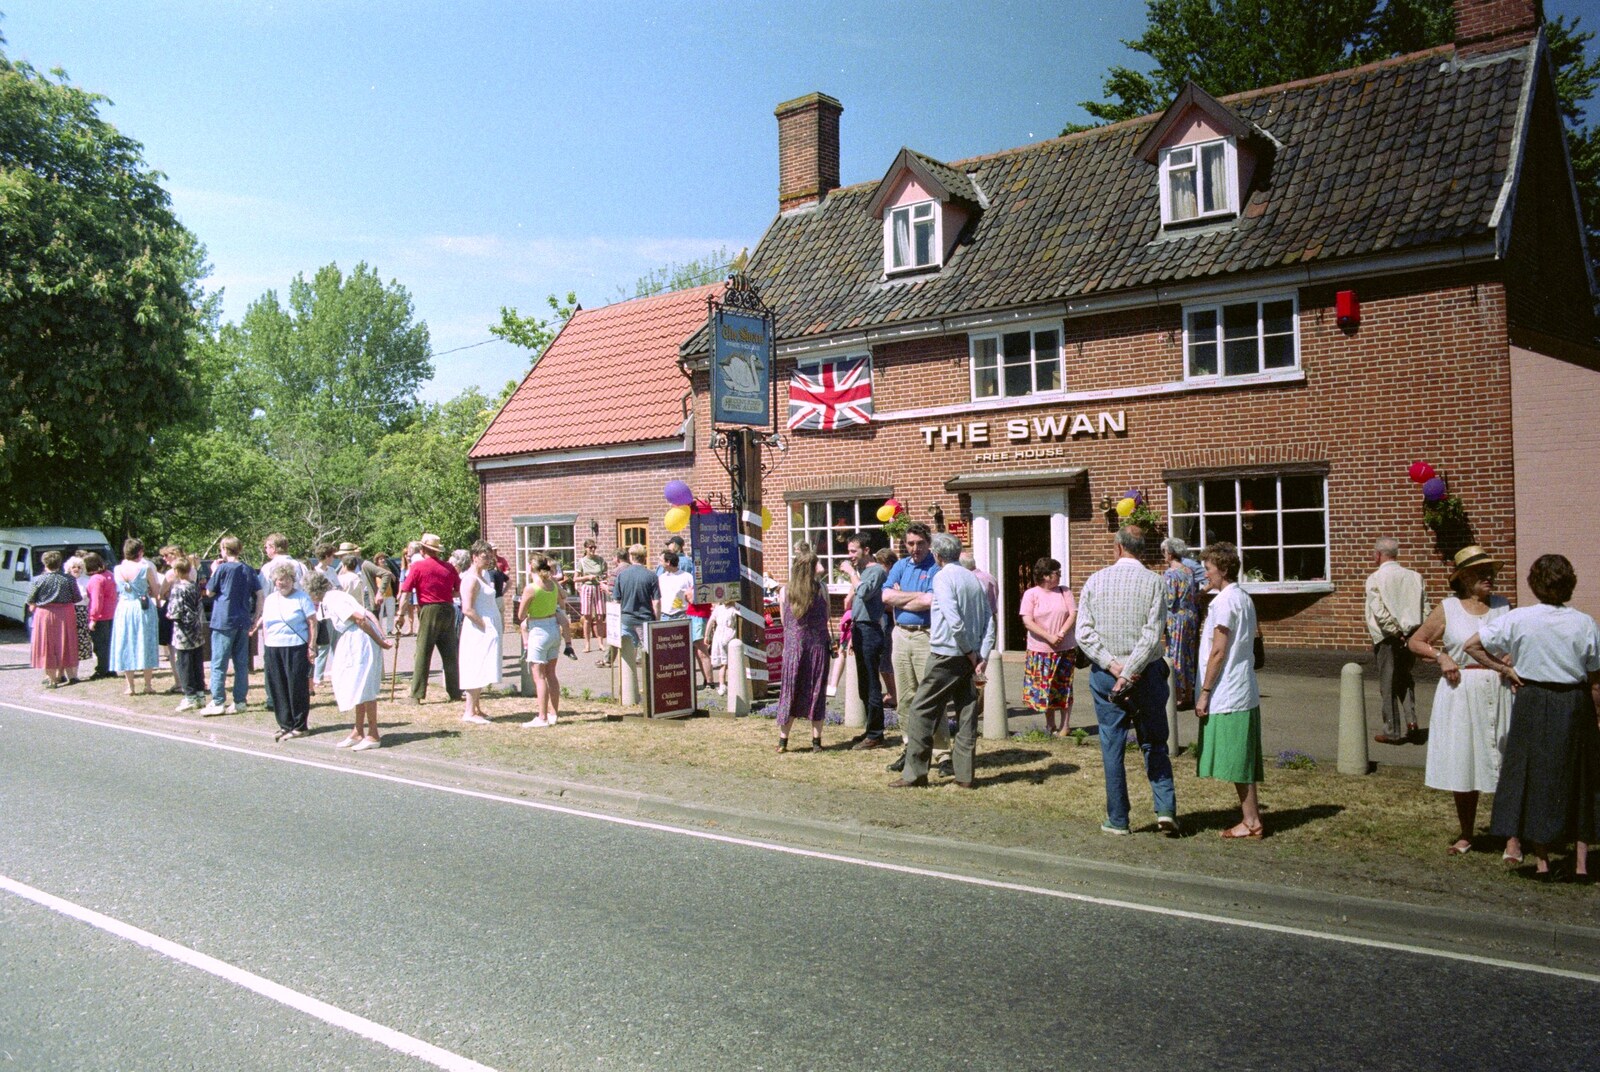 More milling throngs from The Norwich Union Mail Coach Run, The Swan Inn, Brome - 15th June 1996